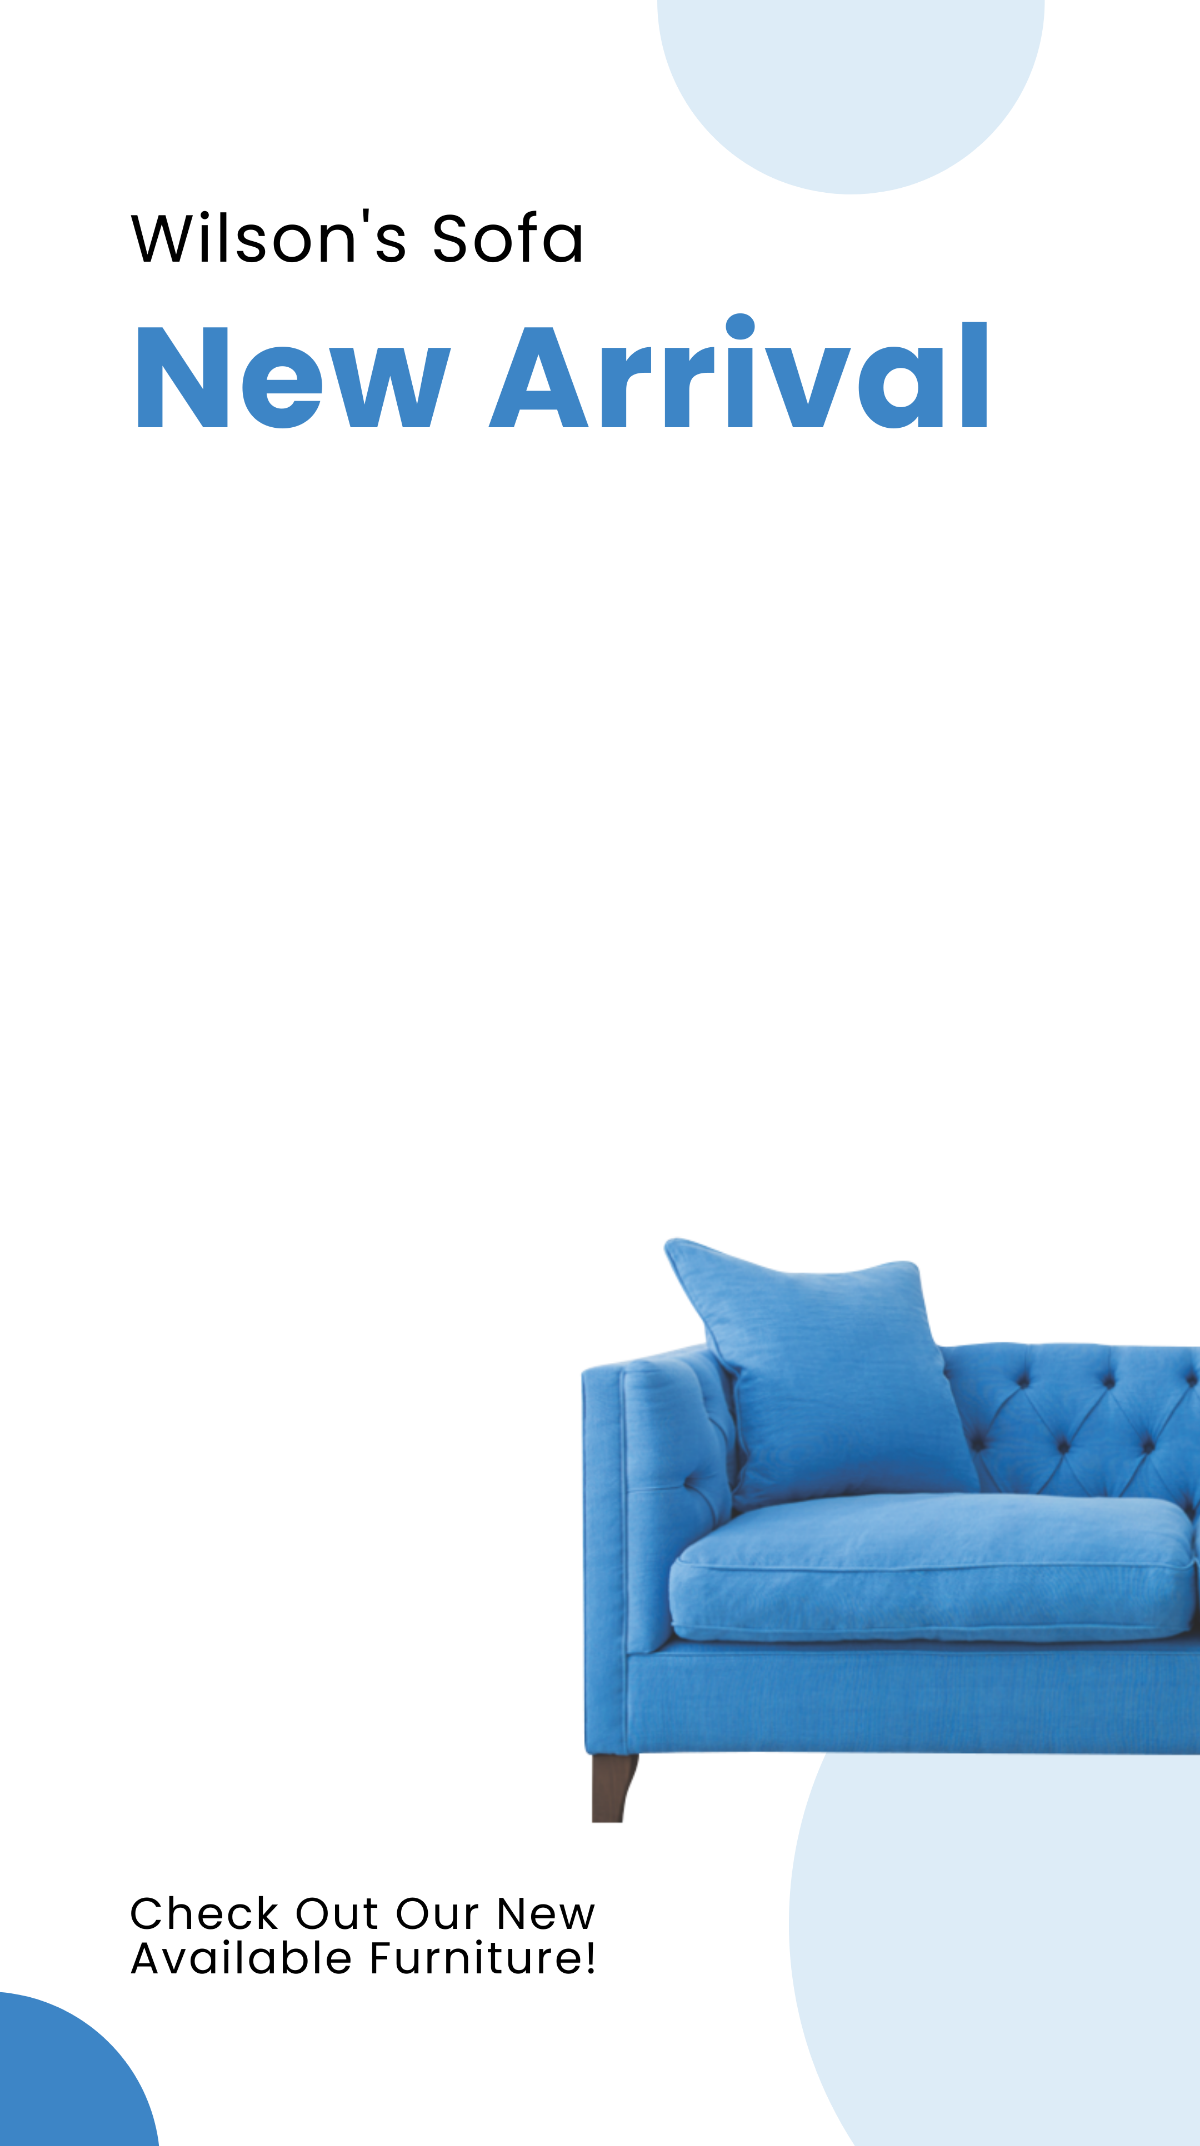 Free New Furniture Arrival Snapchat Geofilter Template